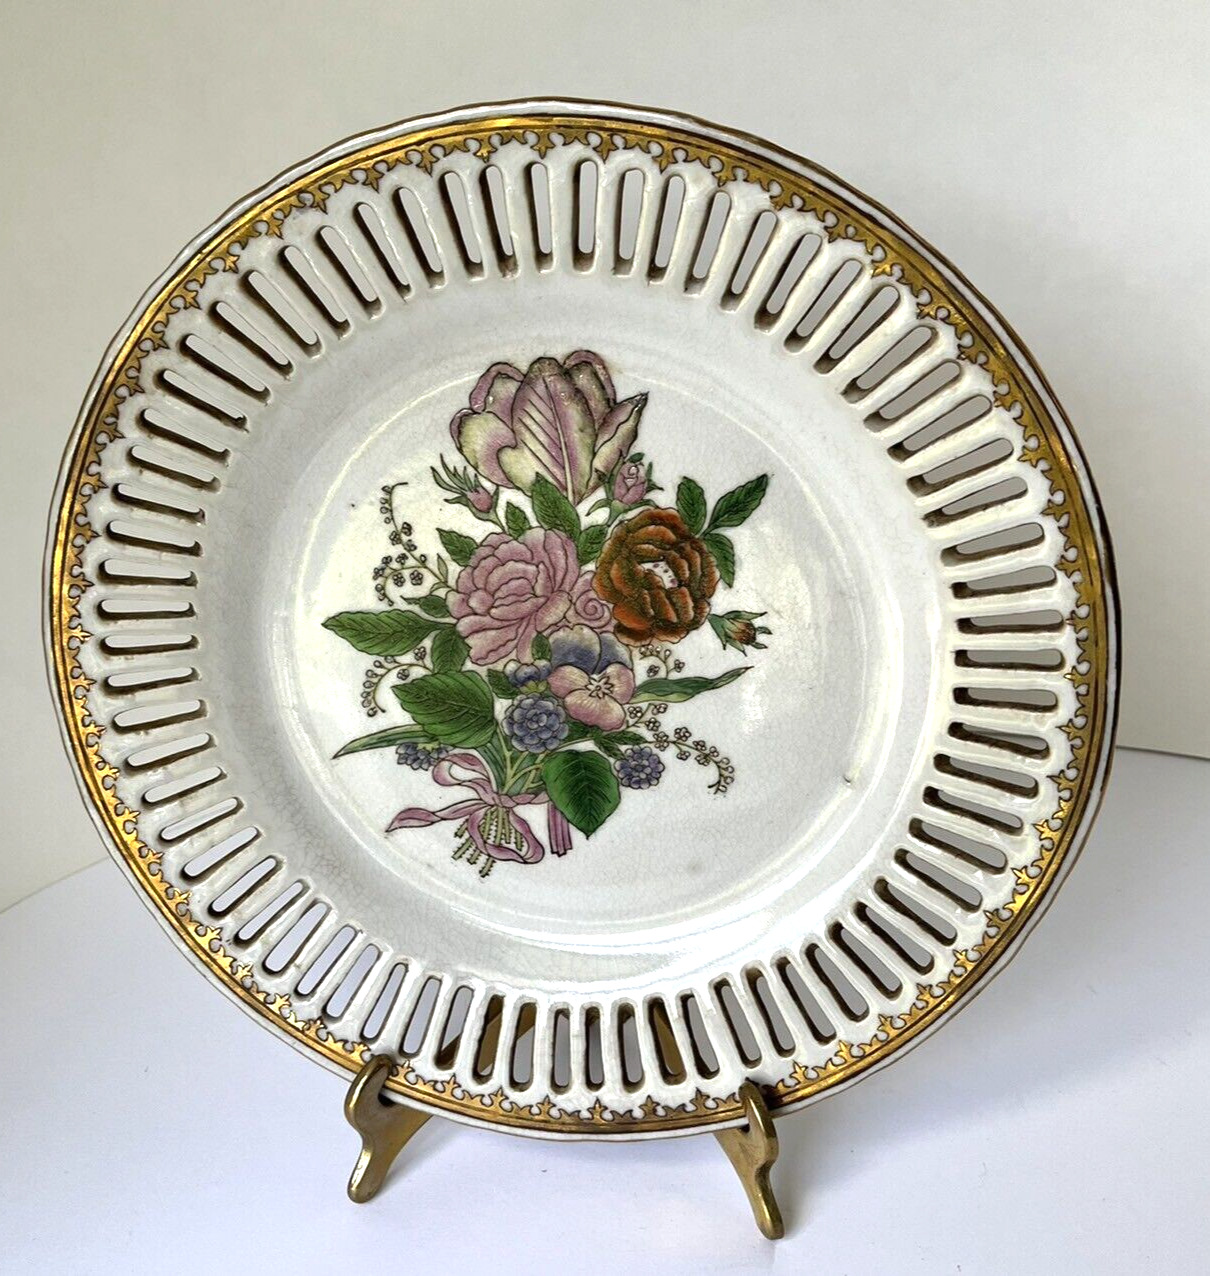 Vintage JUWC United Wilson 1897 Hand-Painted Decorative Reticulated Plate